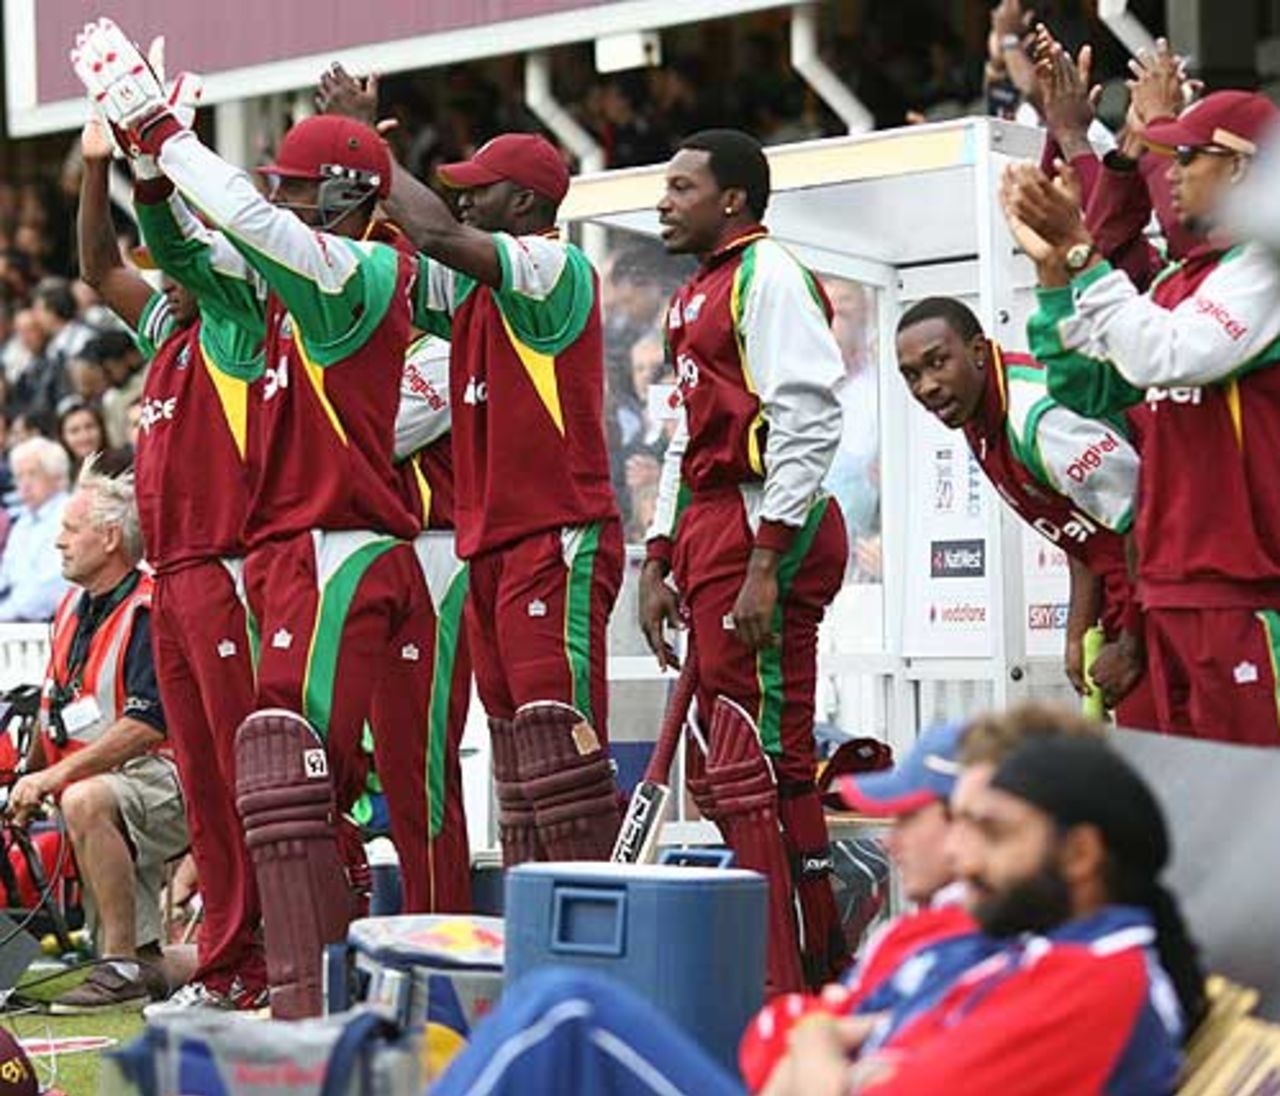 The West Indian dug-out applauds the efforts of their batsmen, England v West Indies, Twenty20, The Oval, June 28, 2007